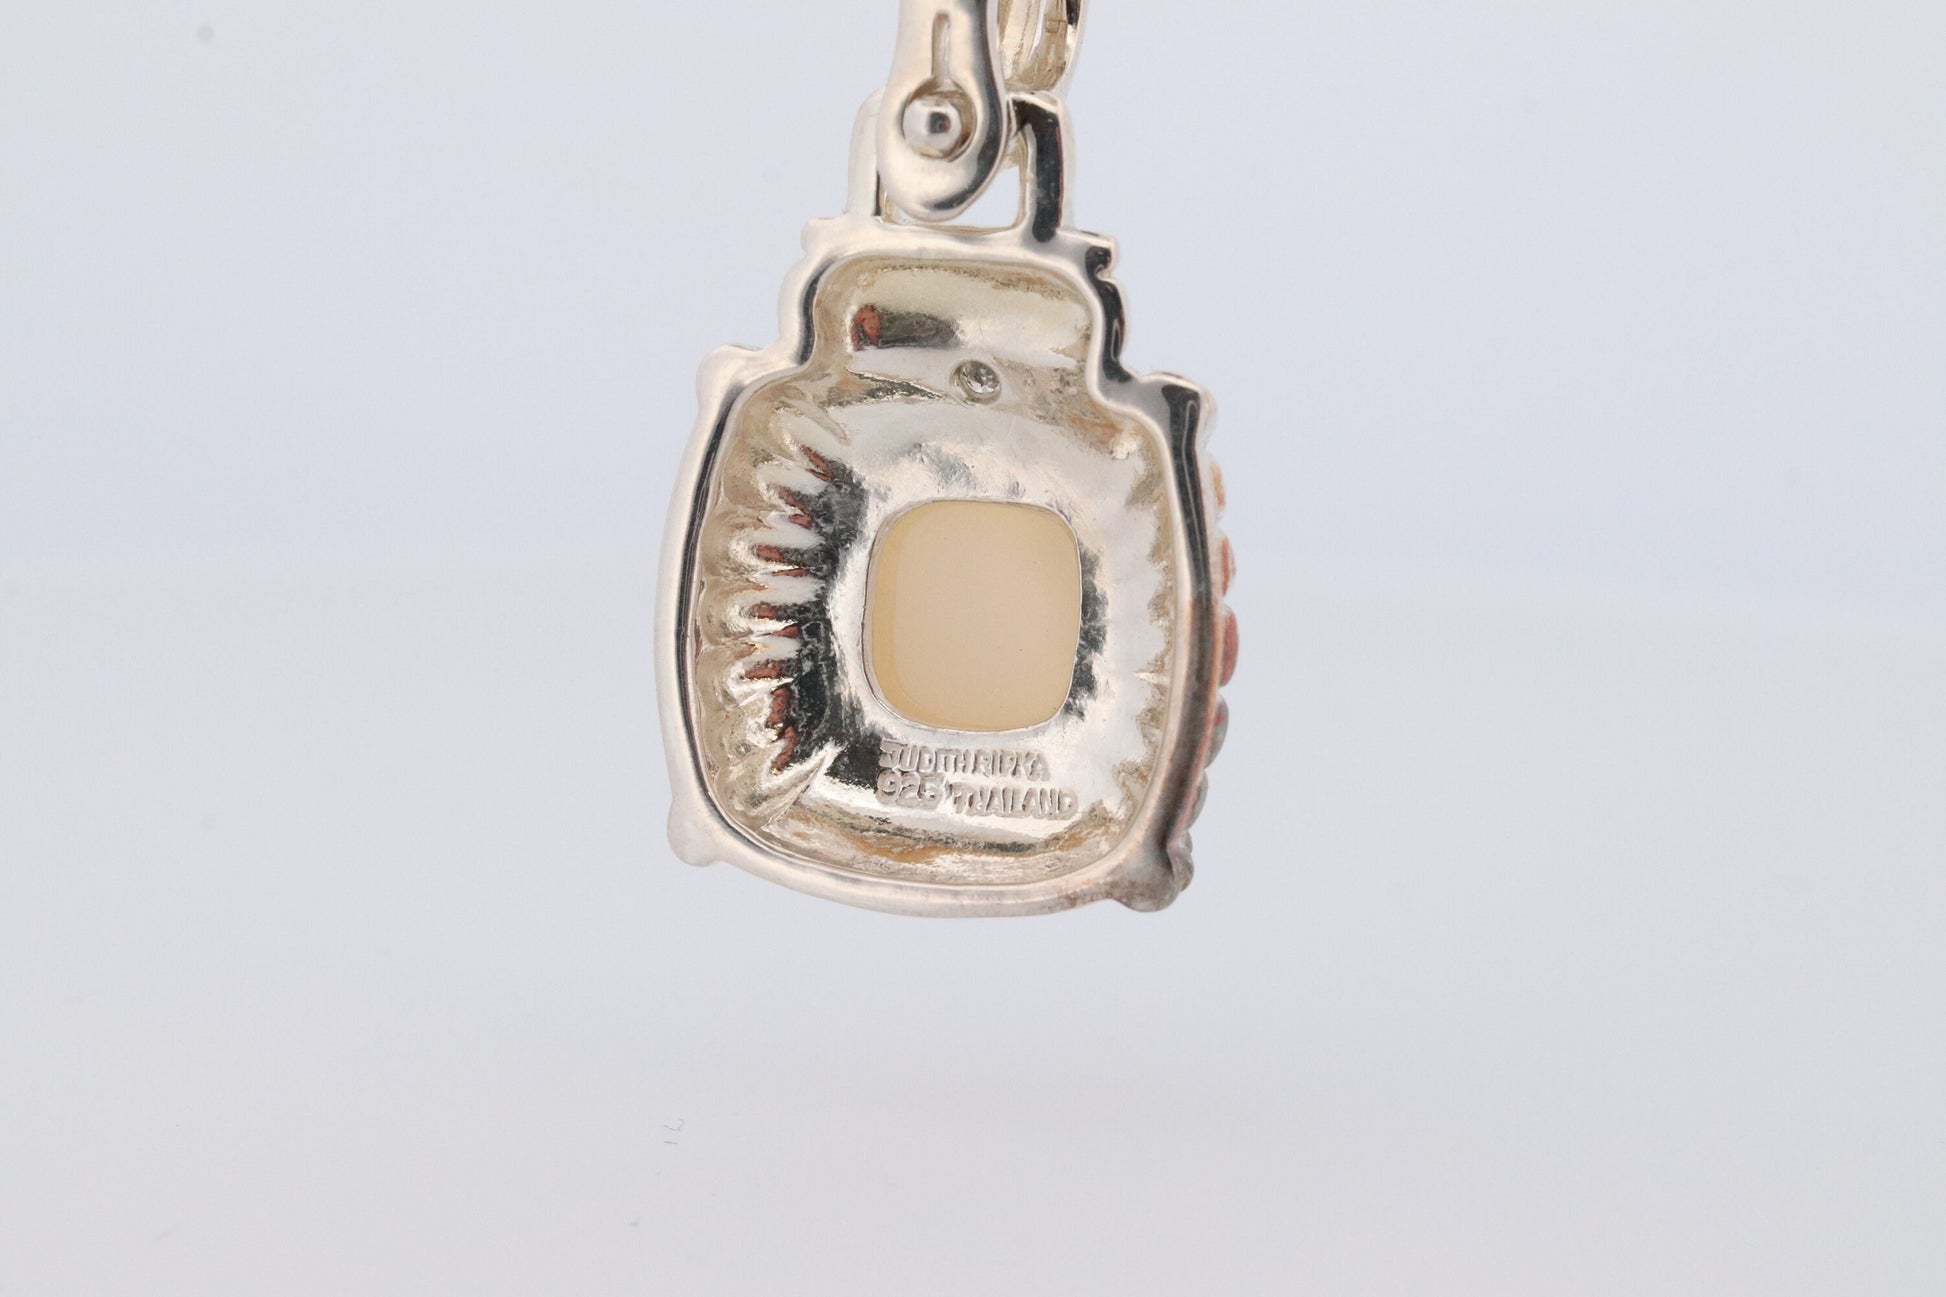 Authentic Judith Ripka Sterling Silver Pendant. Judith Ripka 925 Silver MOP Mother of Pearl Charm (30)